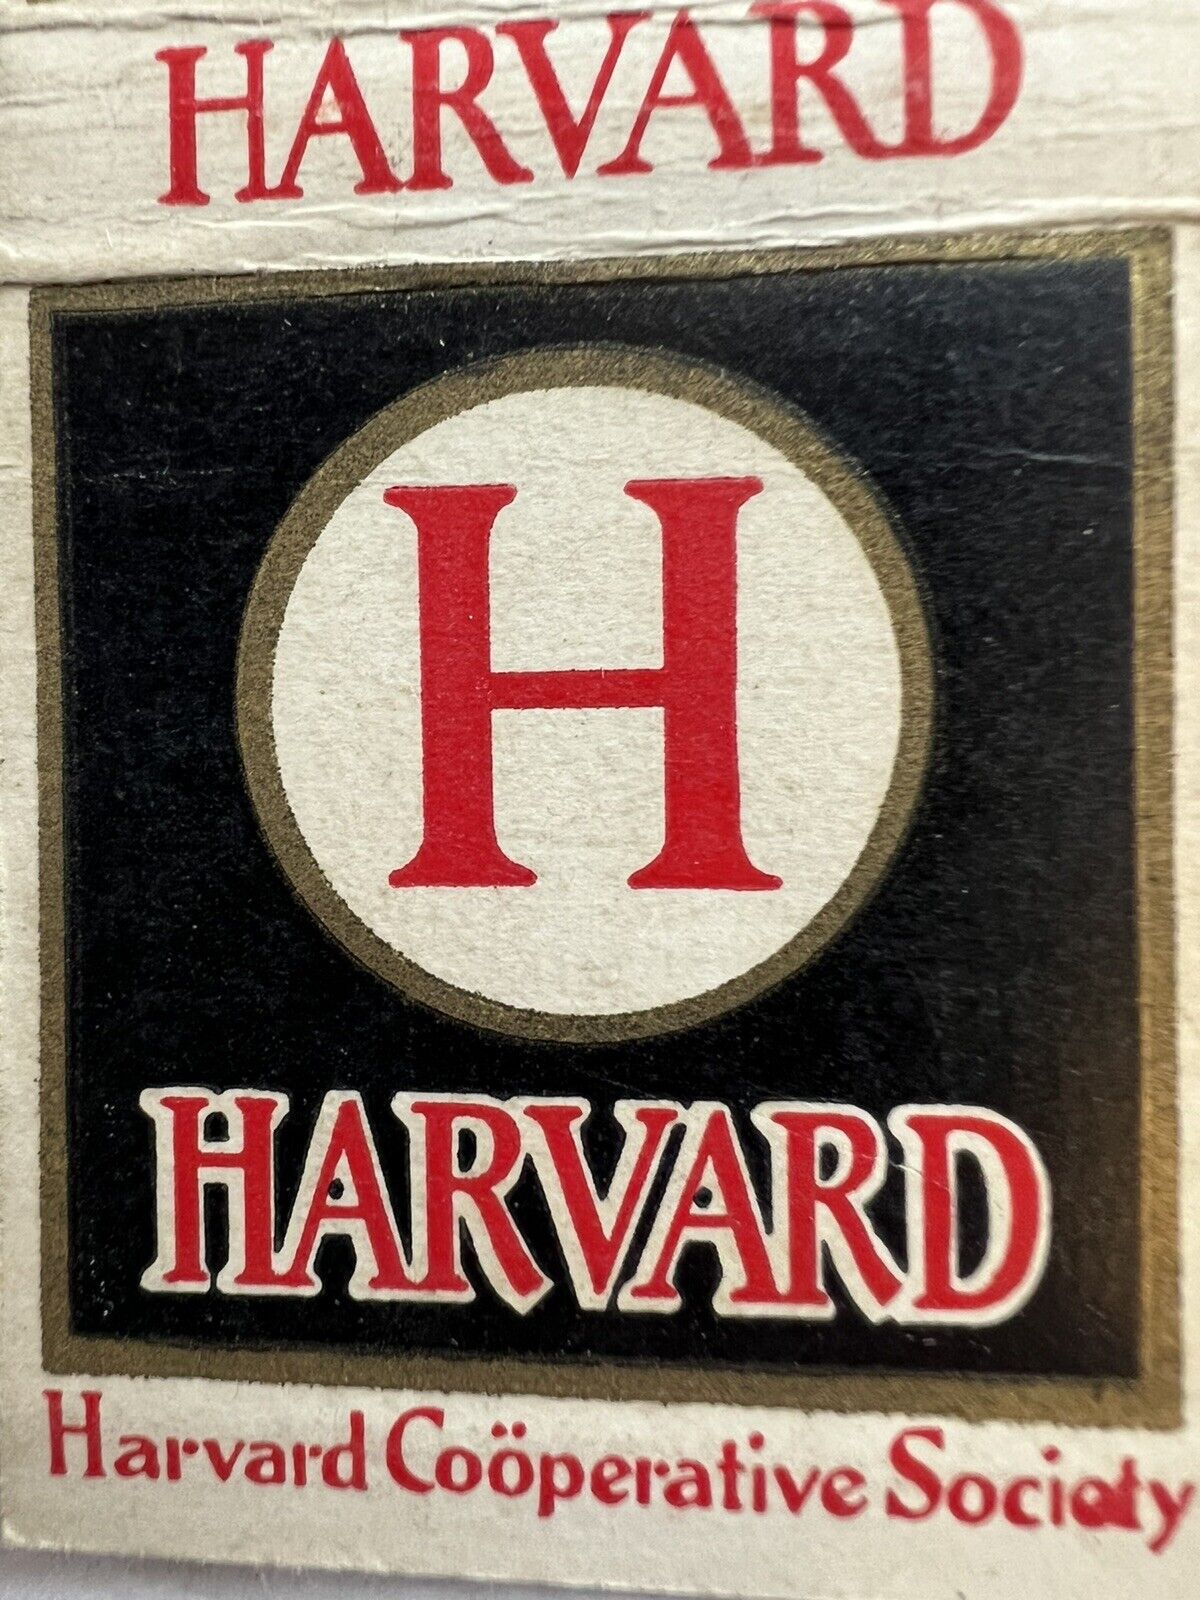 Harvard Cooperative Society Coop Matchbook Cover Cambridge MA Bookstore